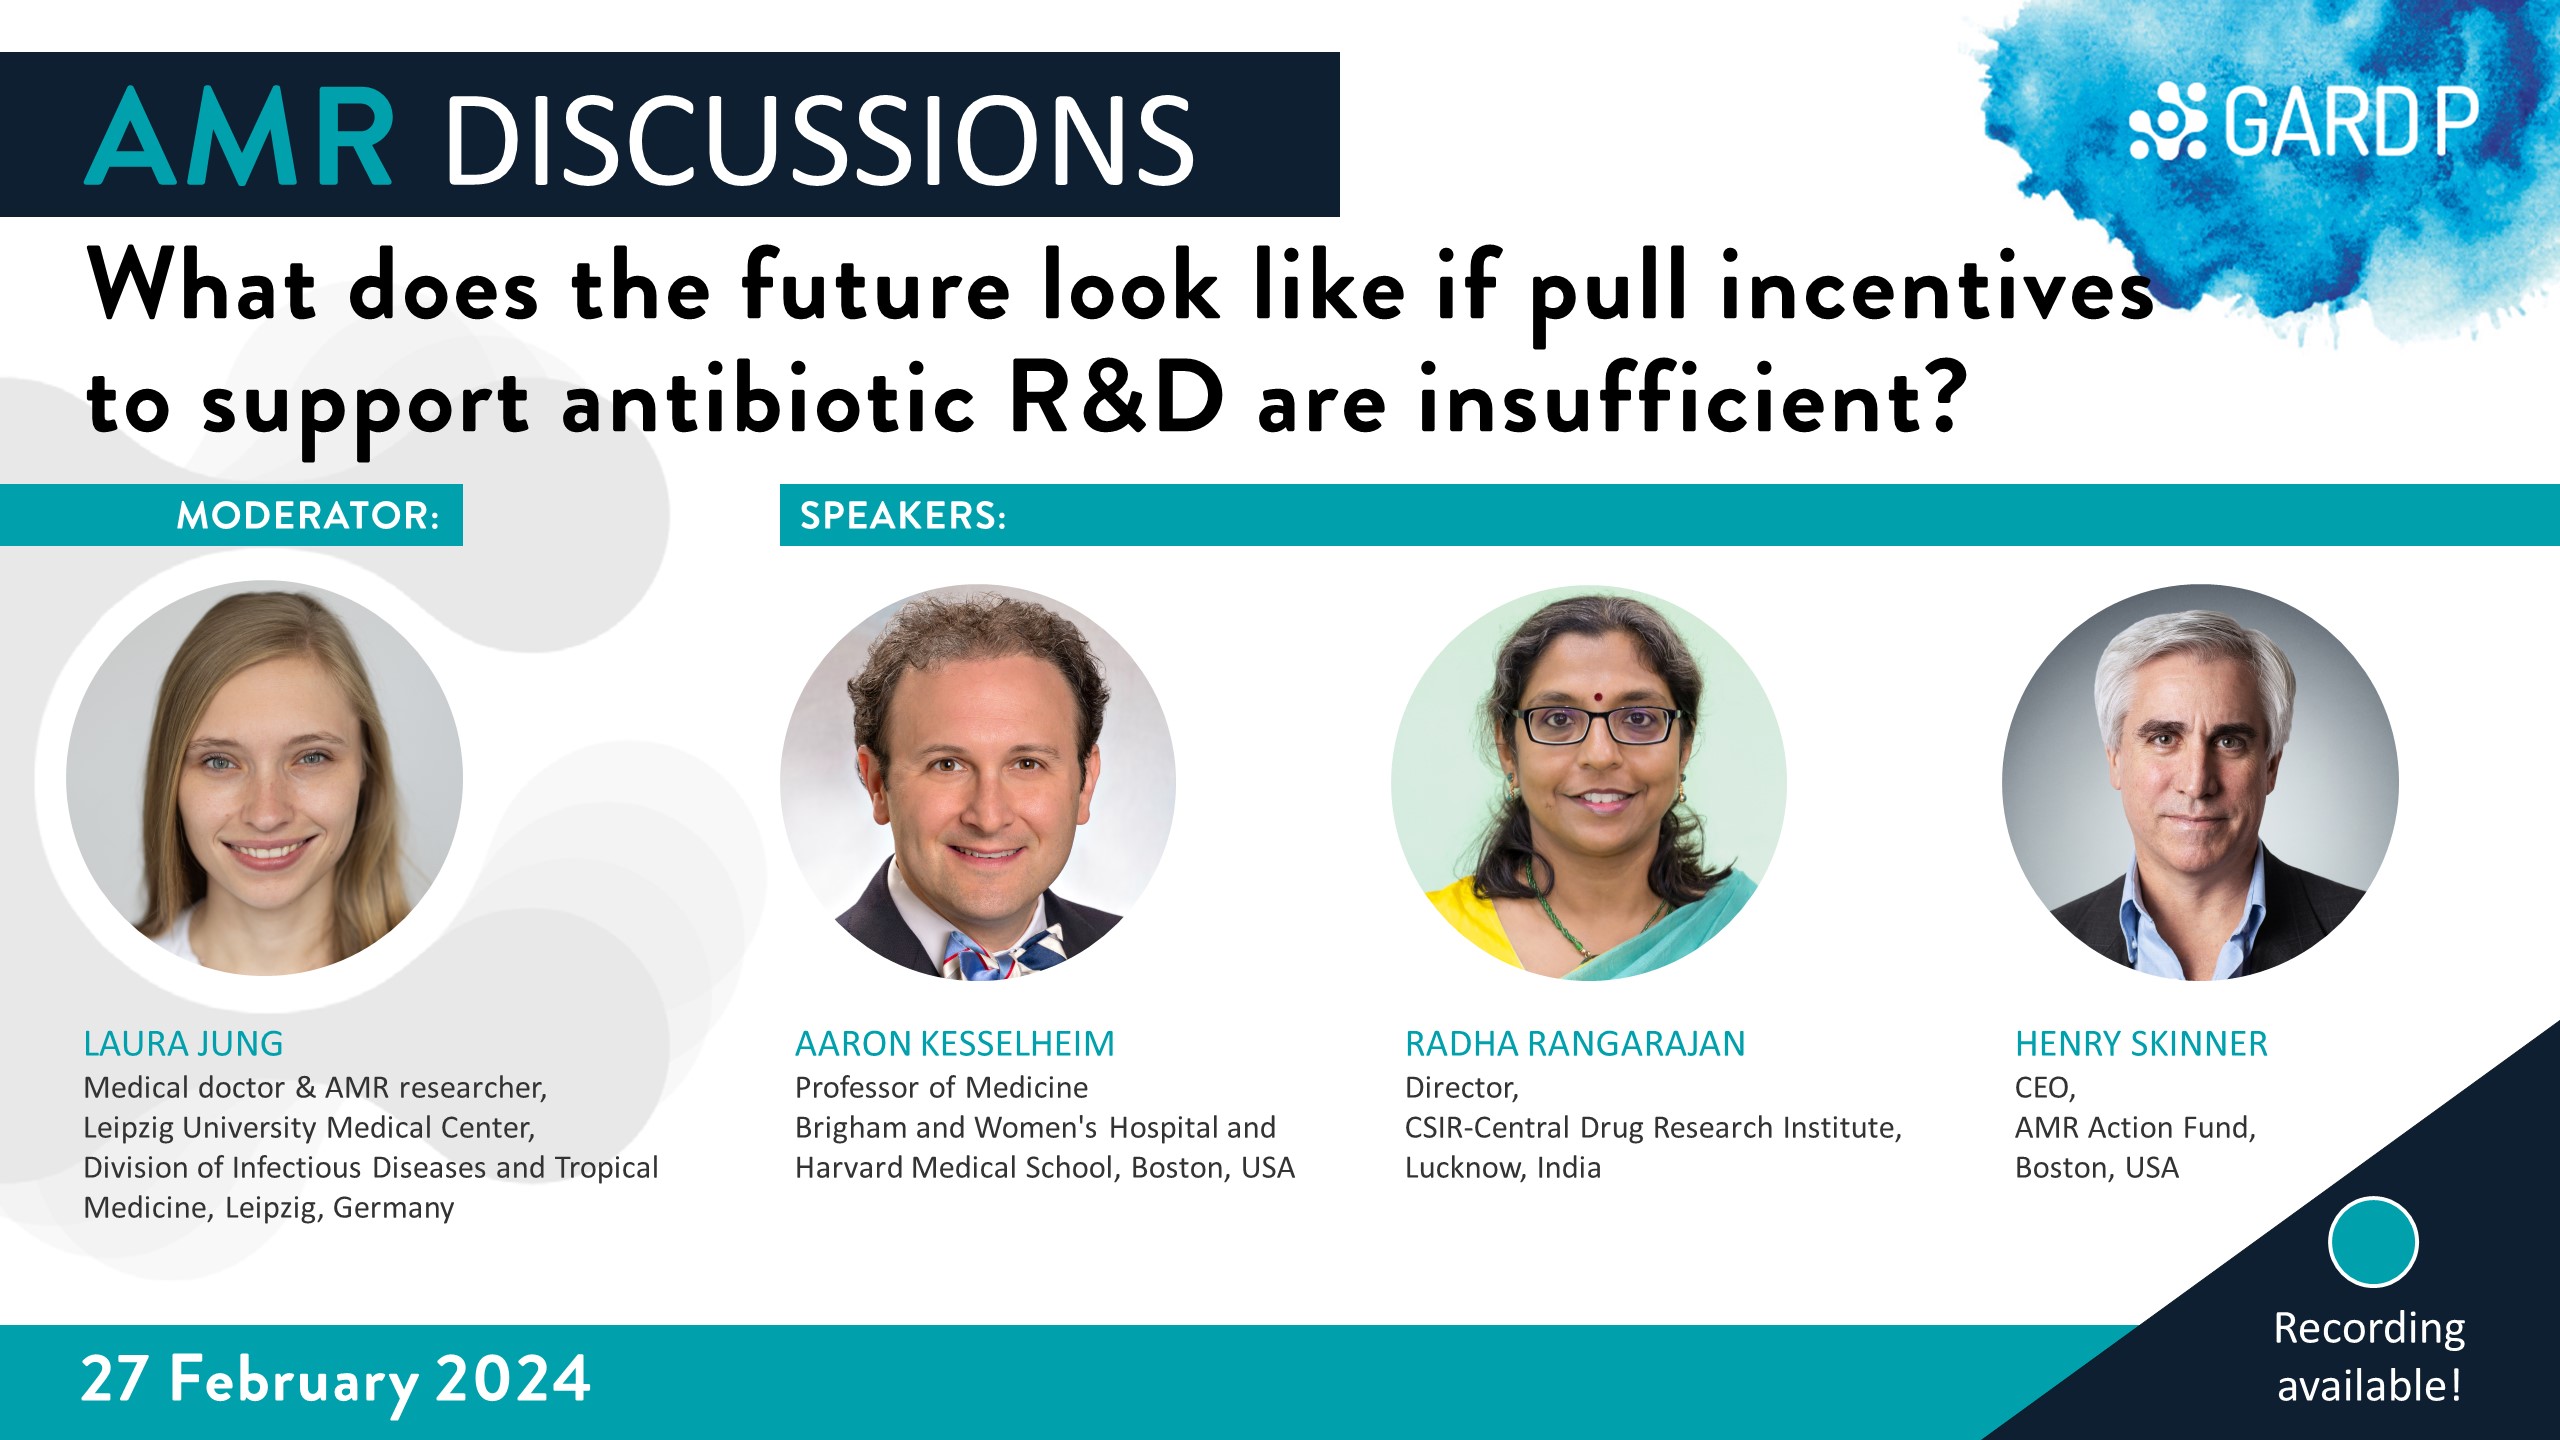 What does the future look like if pull incentives to support antibiotic R&D are insufficient?